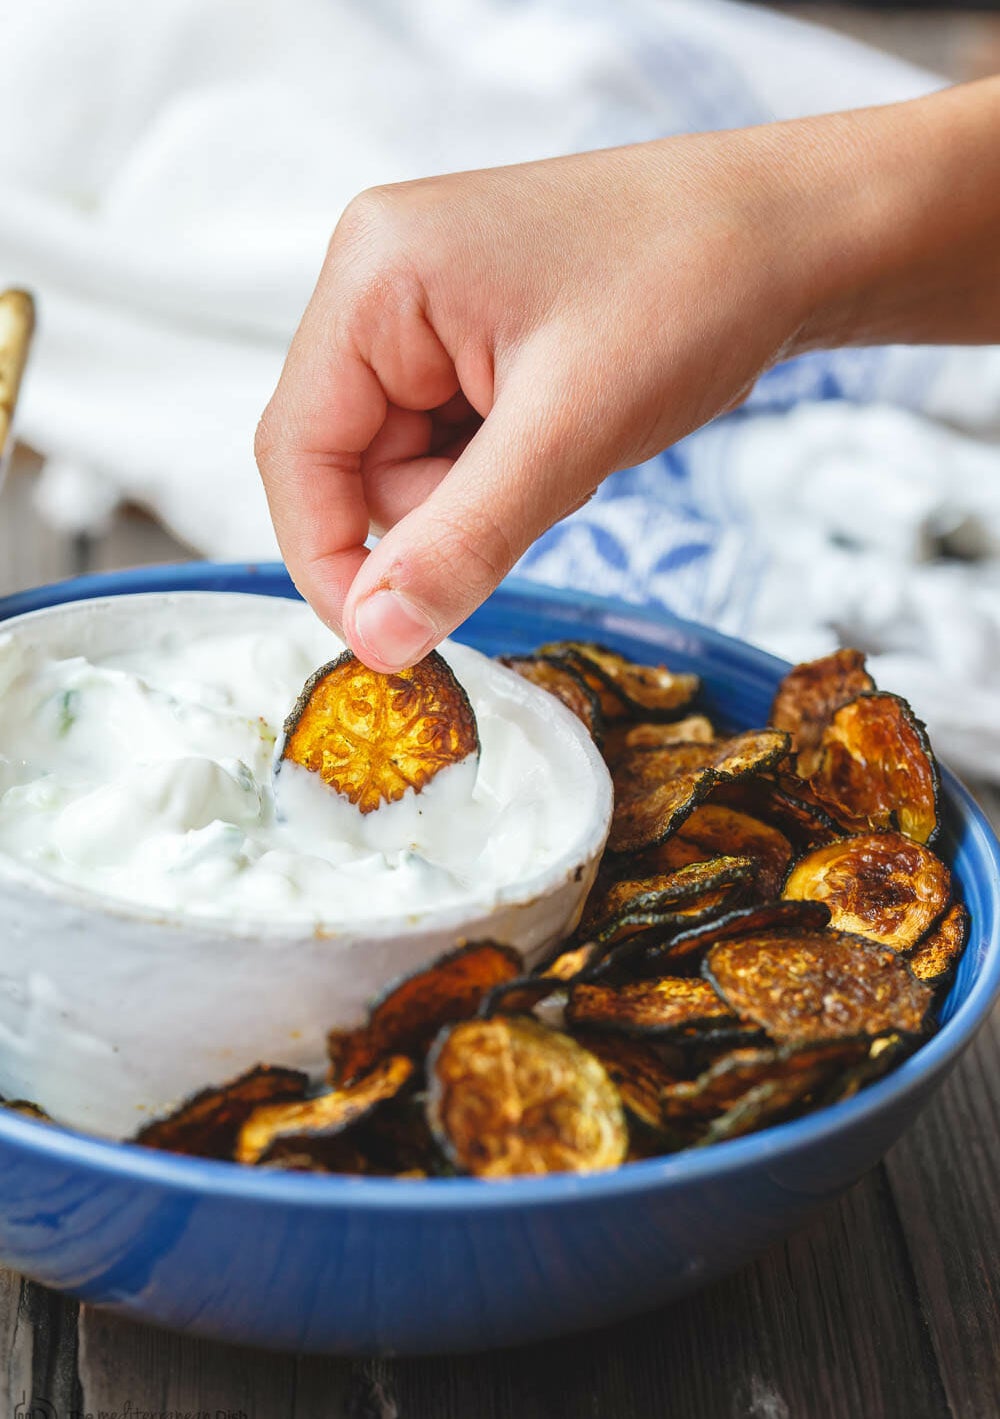 Crispy baked zucchini chips with dip in a bowl